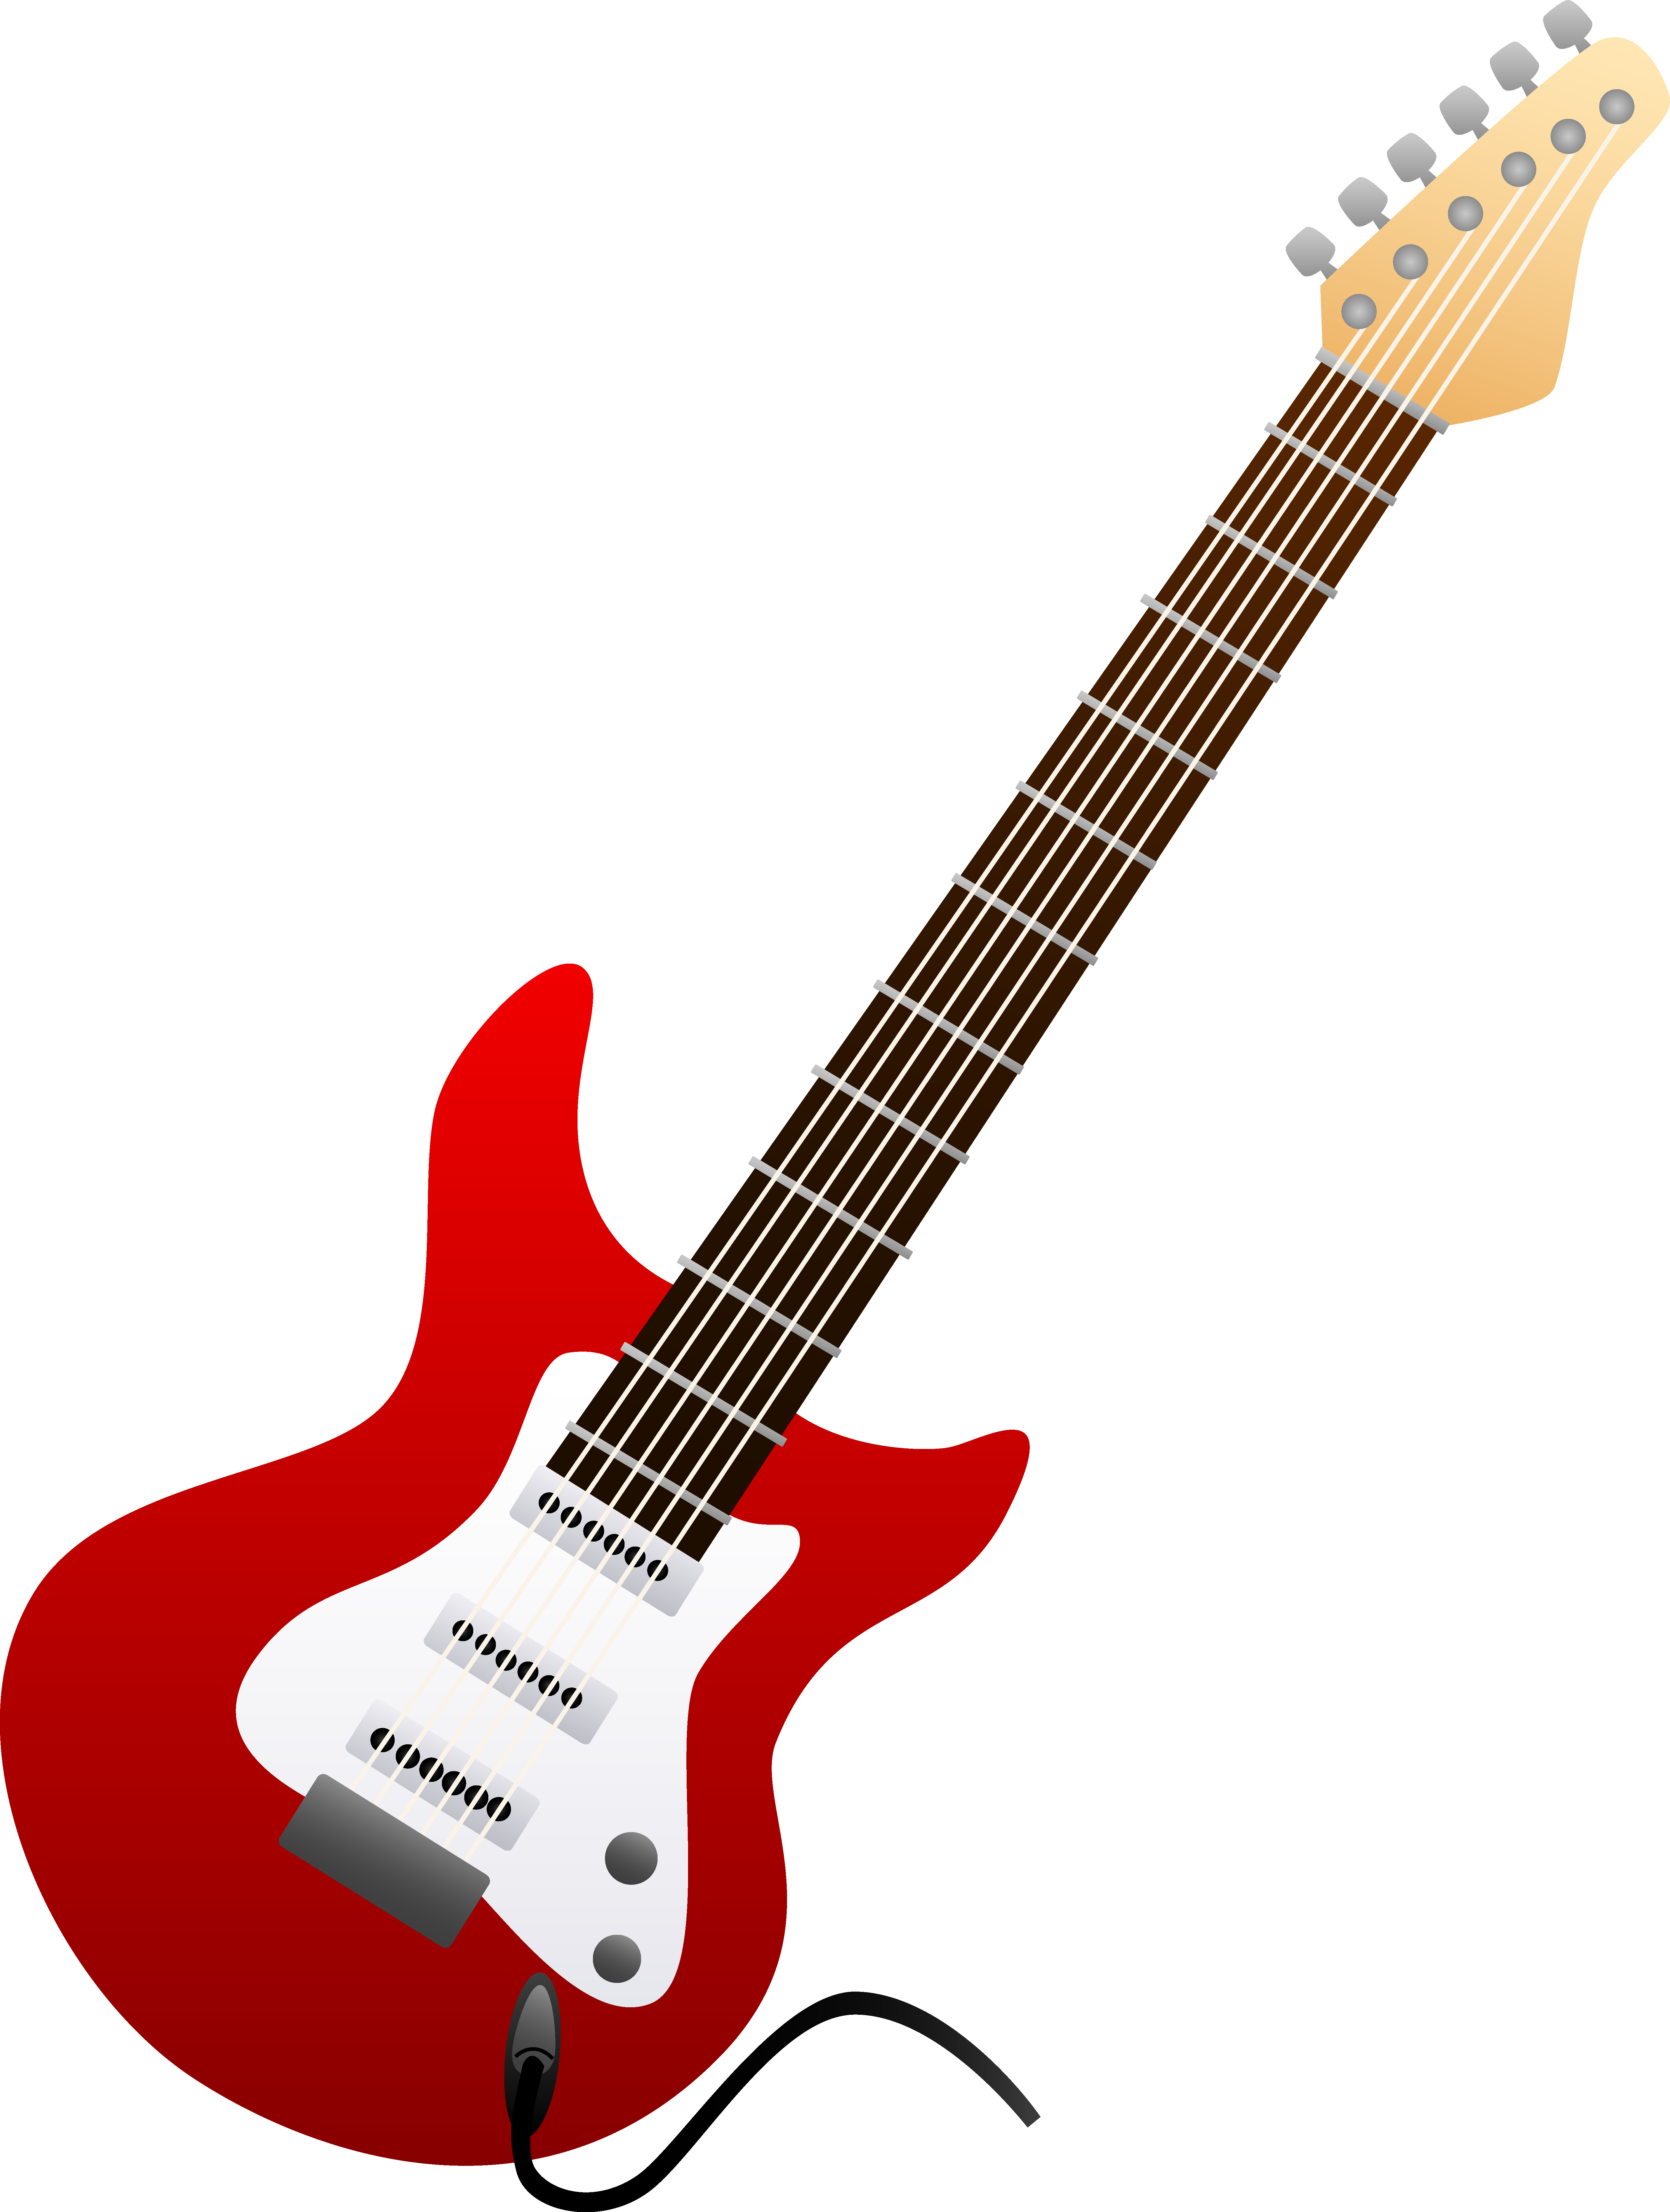 Guitar Outline Clipart Black And White | Clipart library - Free 